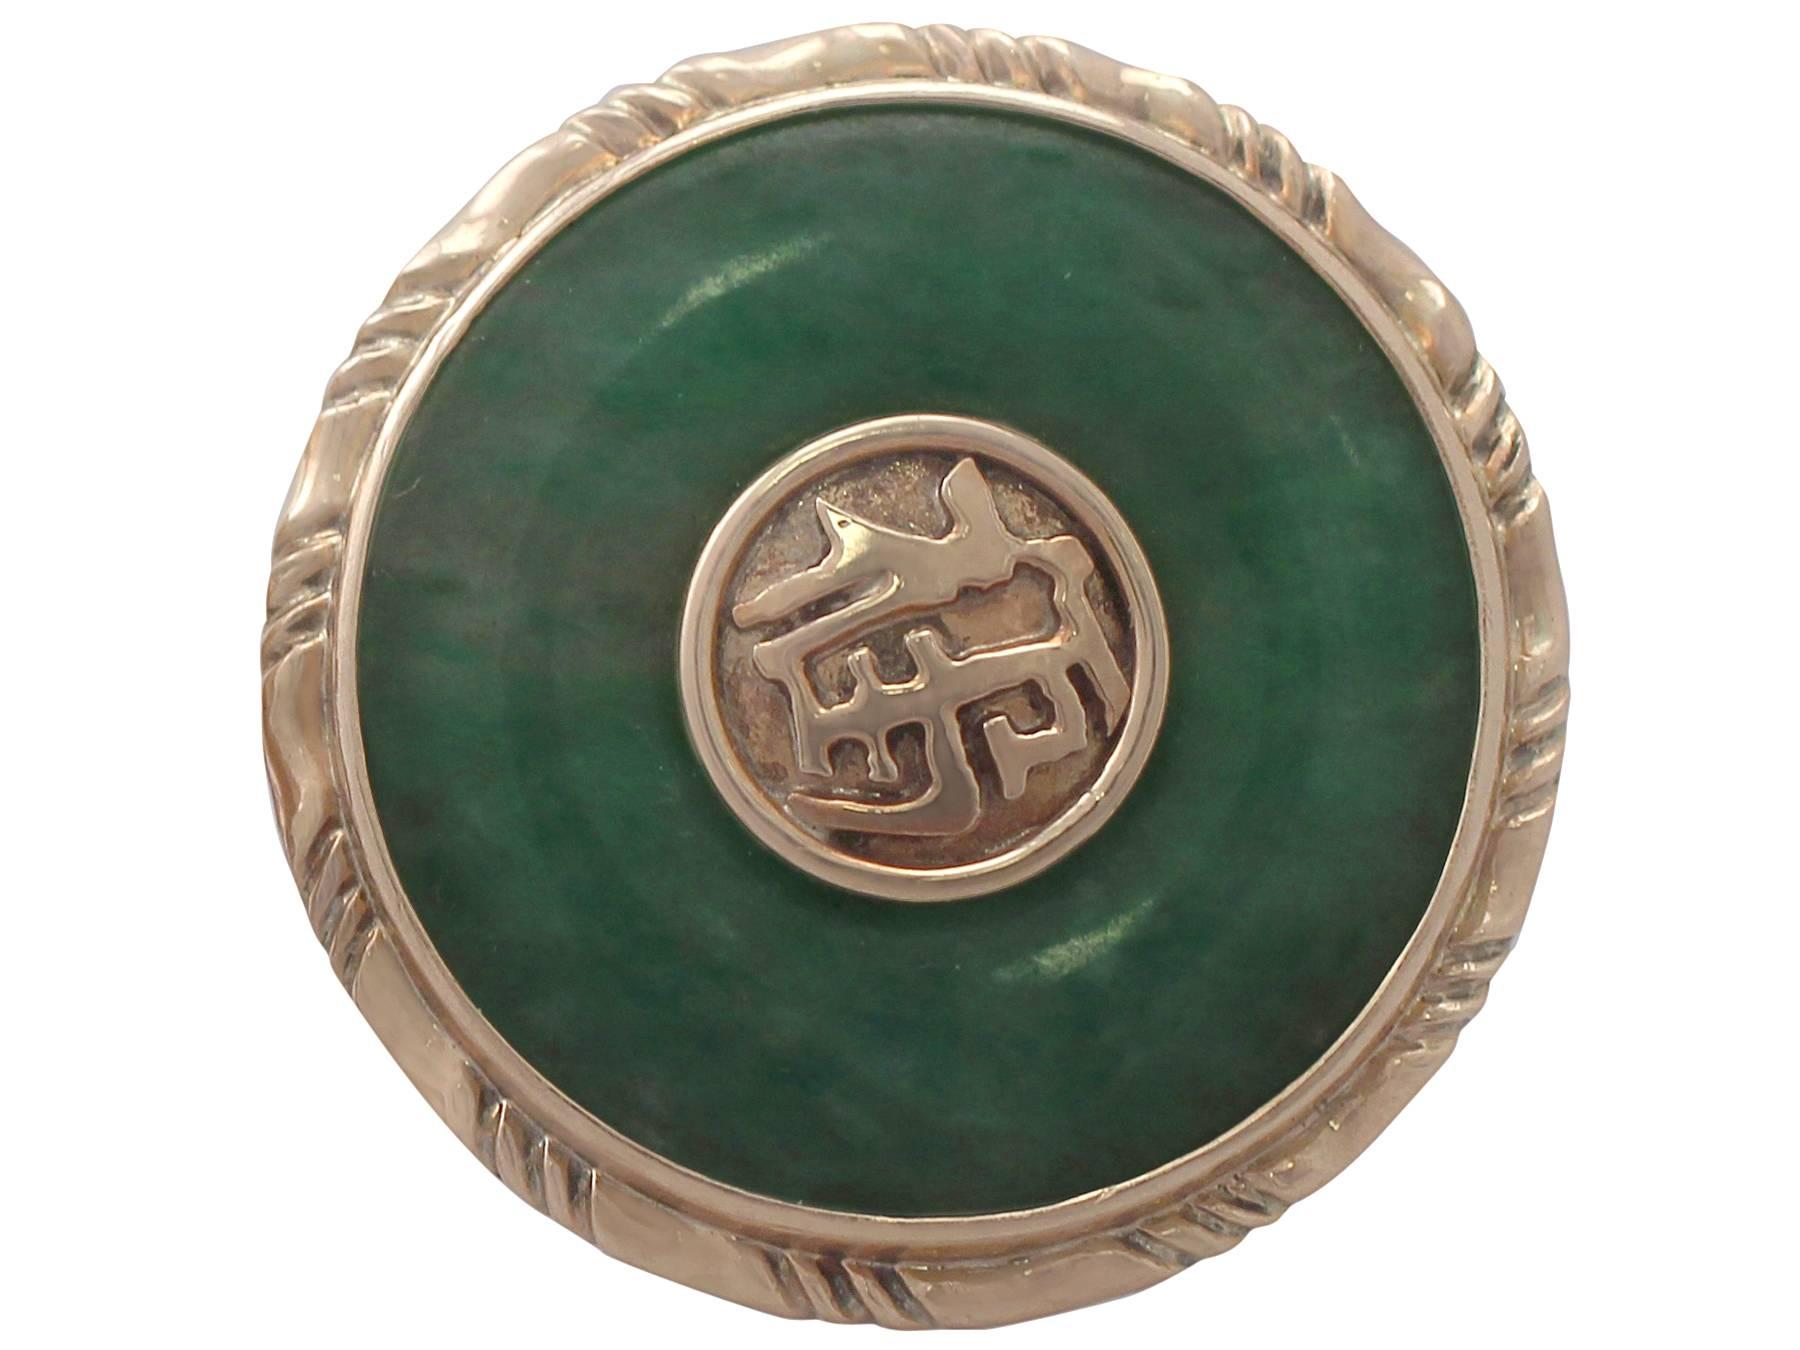 A fine and impressive pair of vintage jade and 14 karat yellow gold cufflinks; part of our men's jewelry and estate jewelry collections

These fine and impressive vintage jade (jadeite*) cufflinks have been crafted in 14k yellow gold.

The